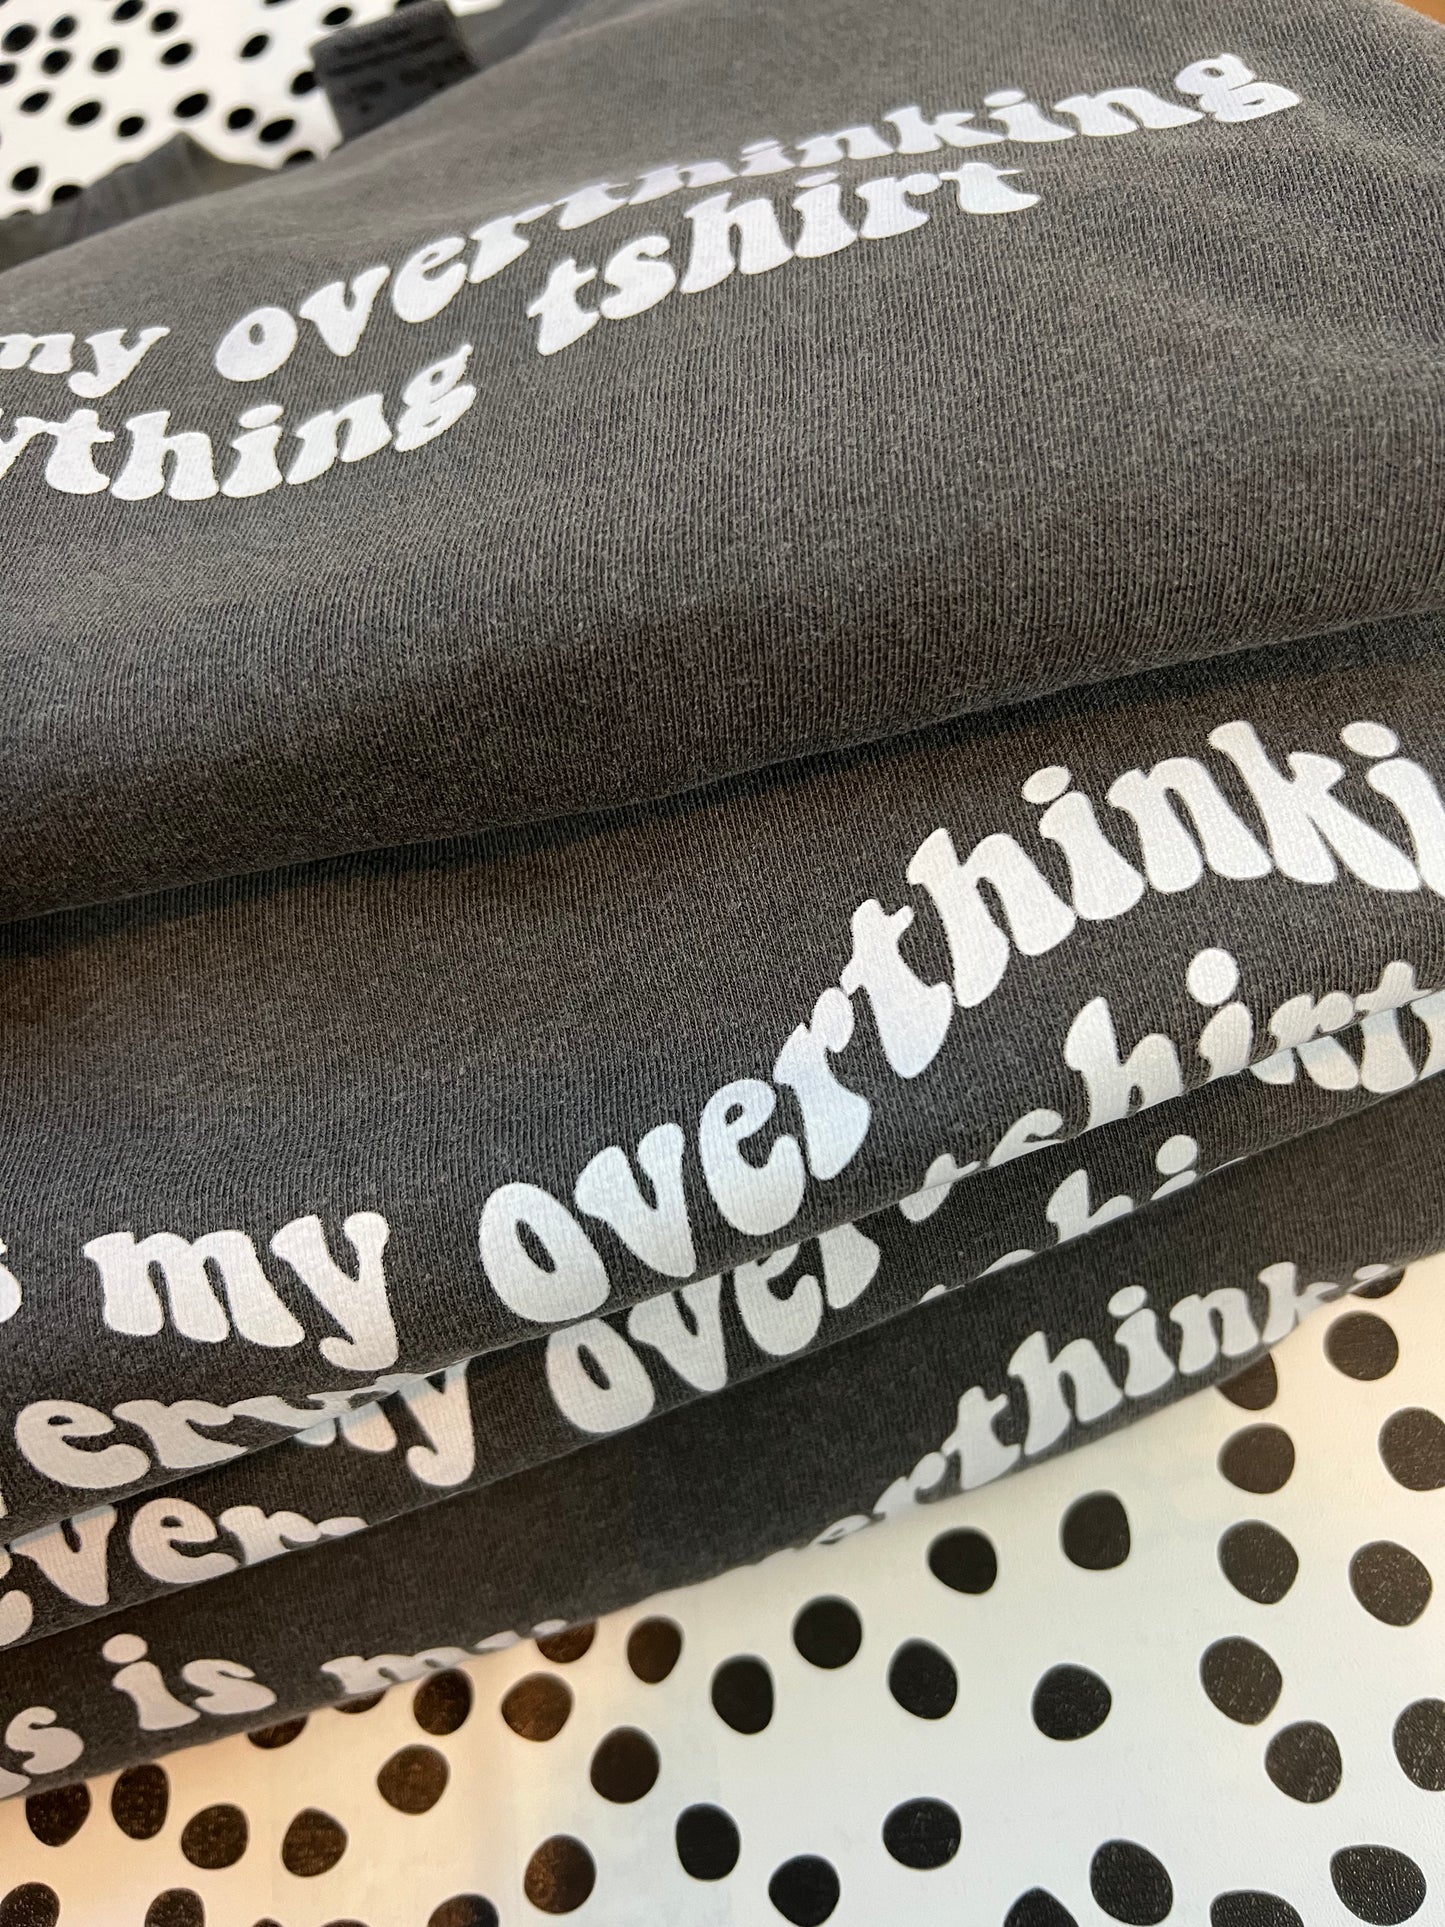 this is my overthinking everything tshirt